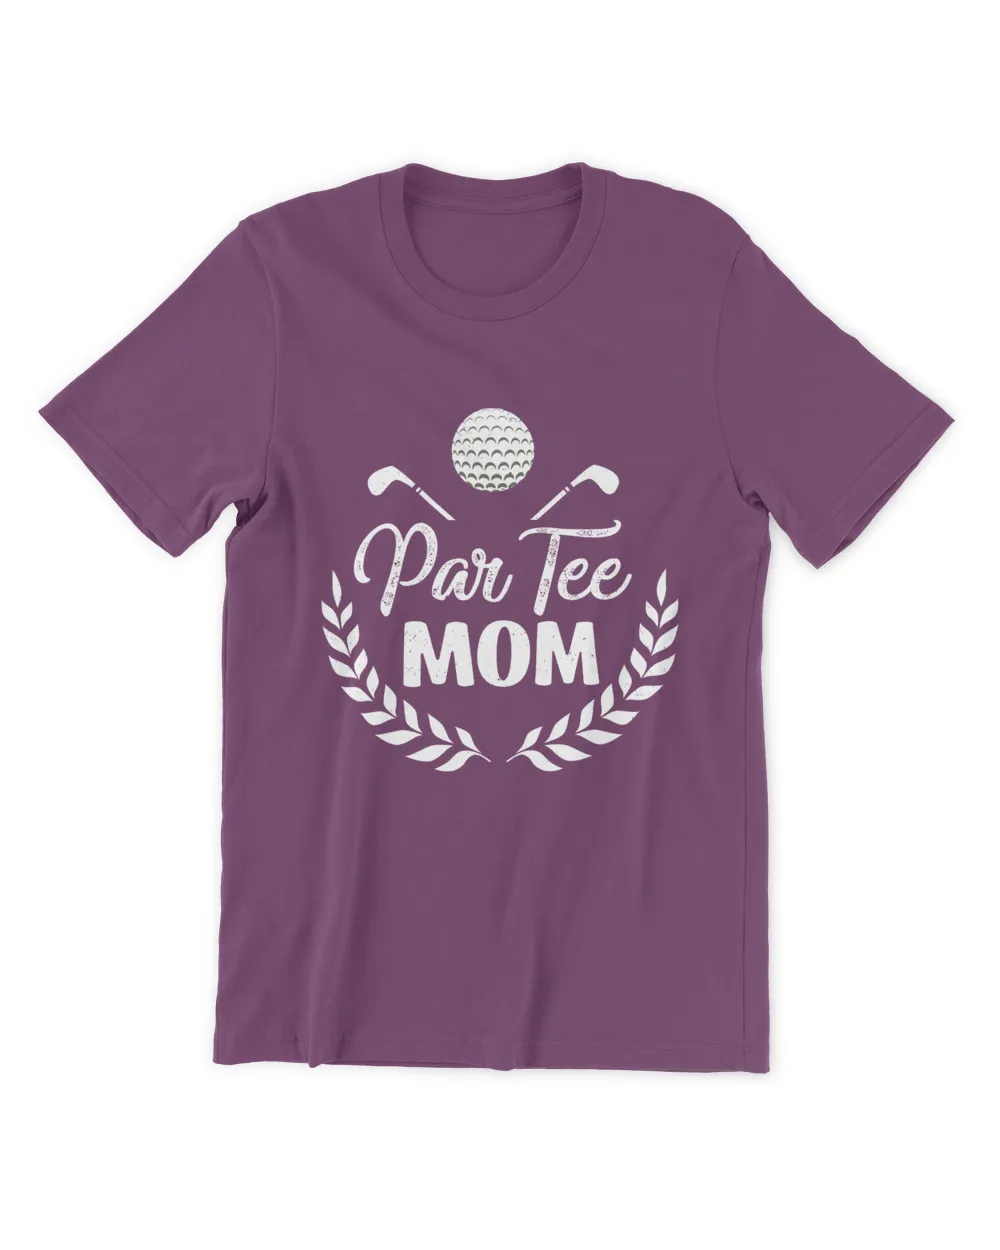 RD Par Tee Mom Golfer Shirt, Funny Partee Golf For Mother's Day T-Shirt